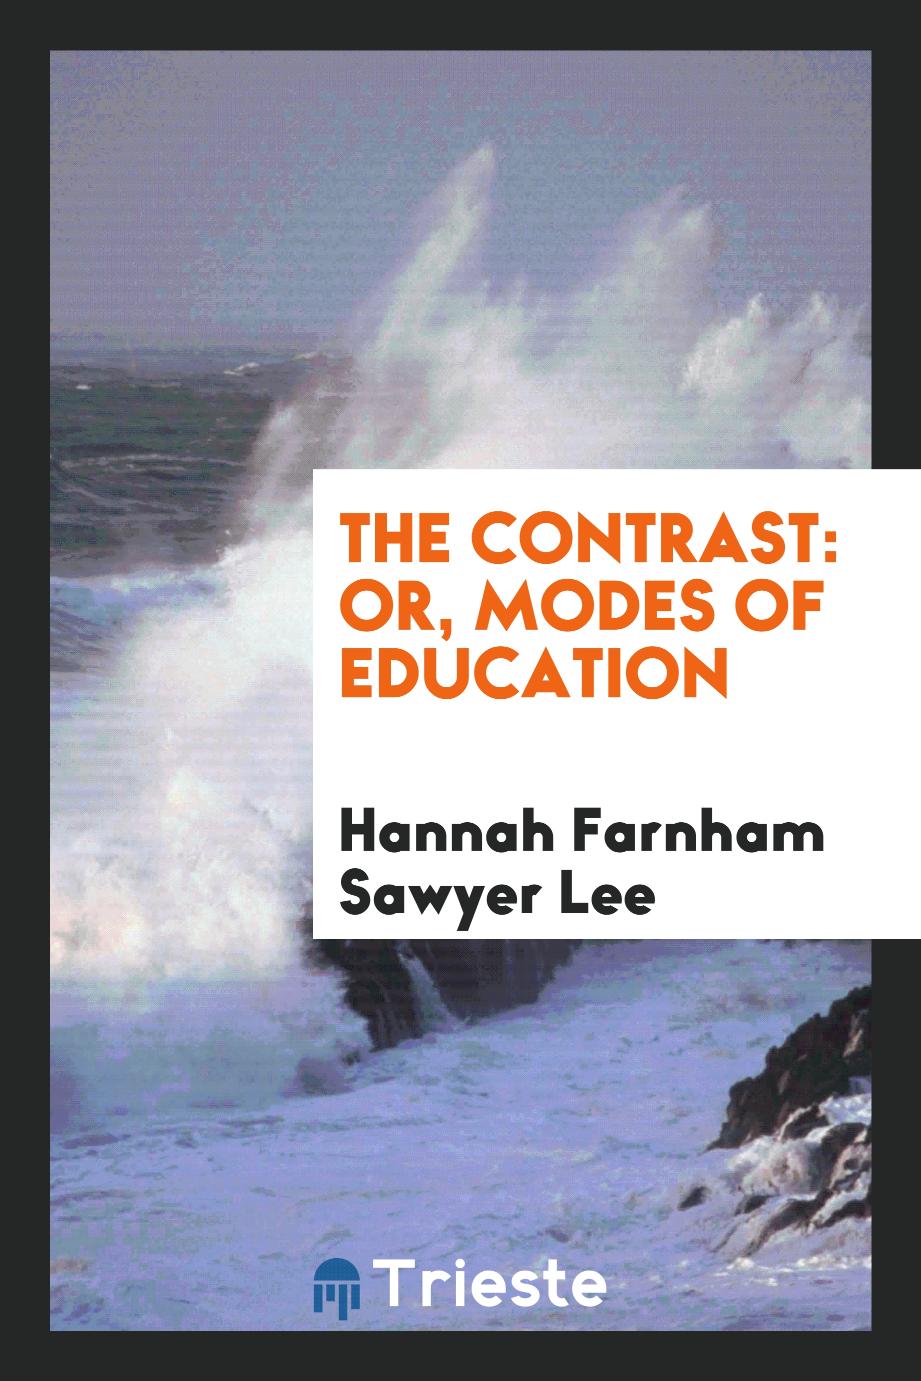 The Contrast: Or, Modes of Education